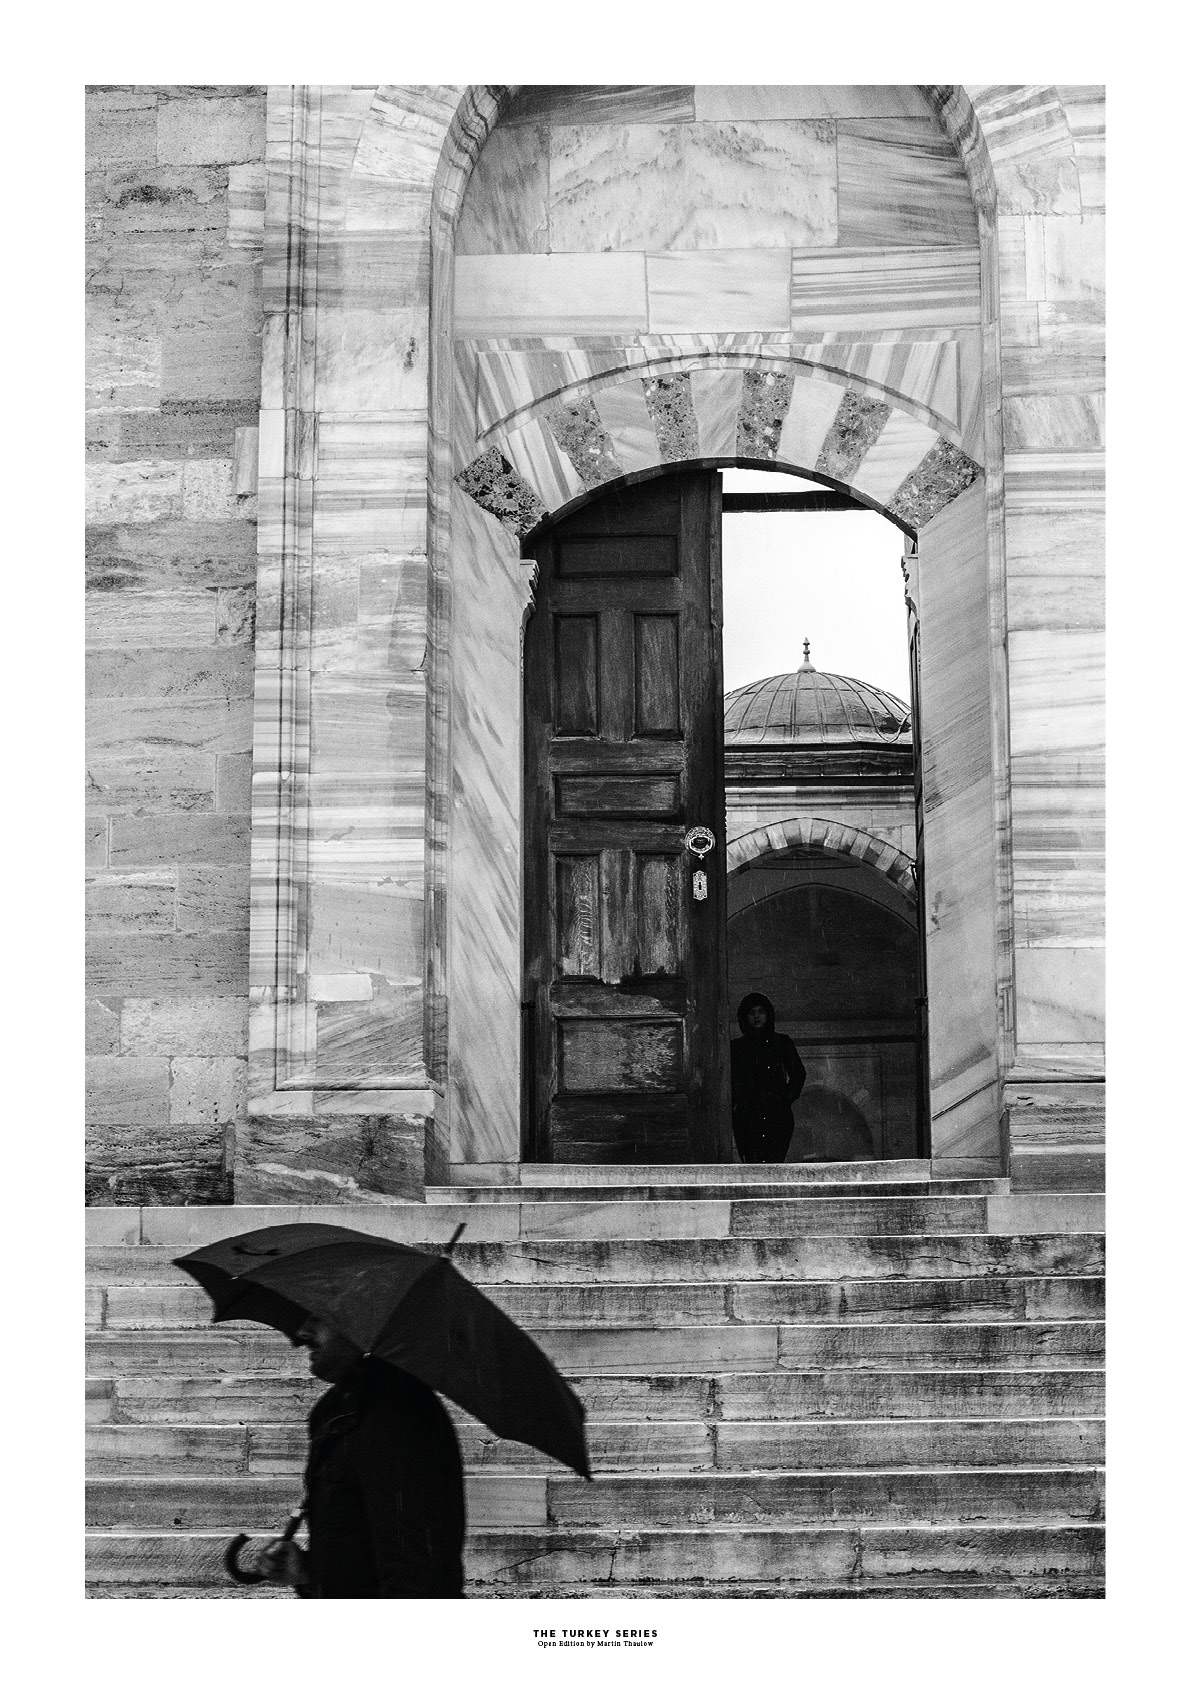 The Turkey Series - Al Fatih Mosque in Istanbul. Photo by photographer Martin Thaulow. Open Edition (seen with the white frame around the image as it is sold). Buy high quality print.